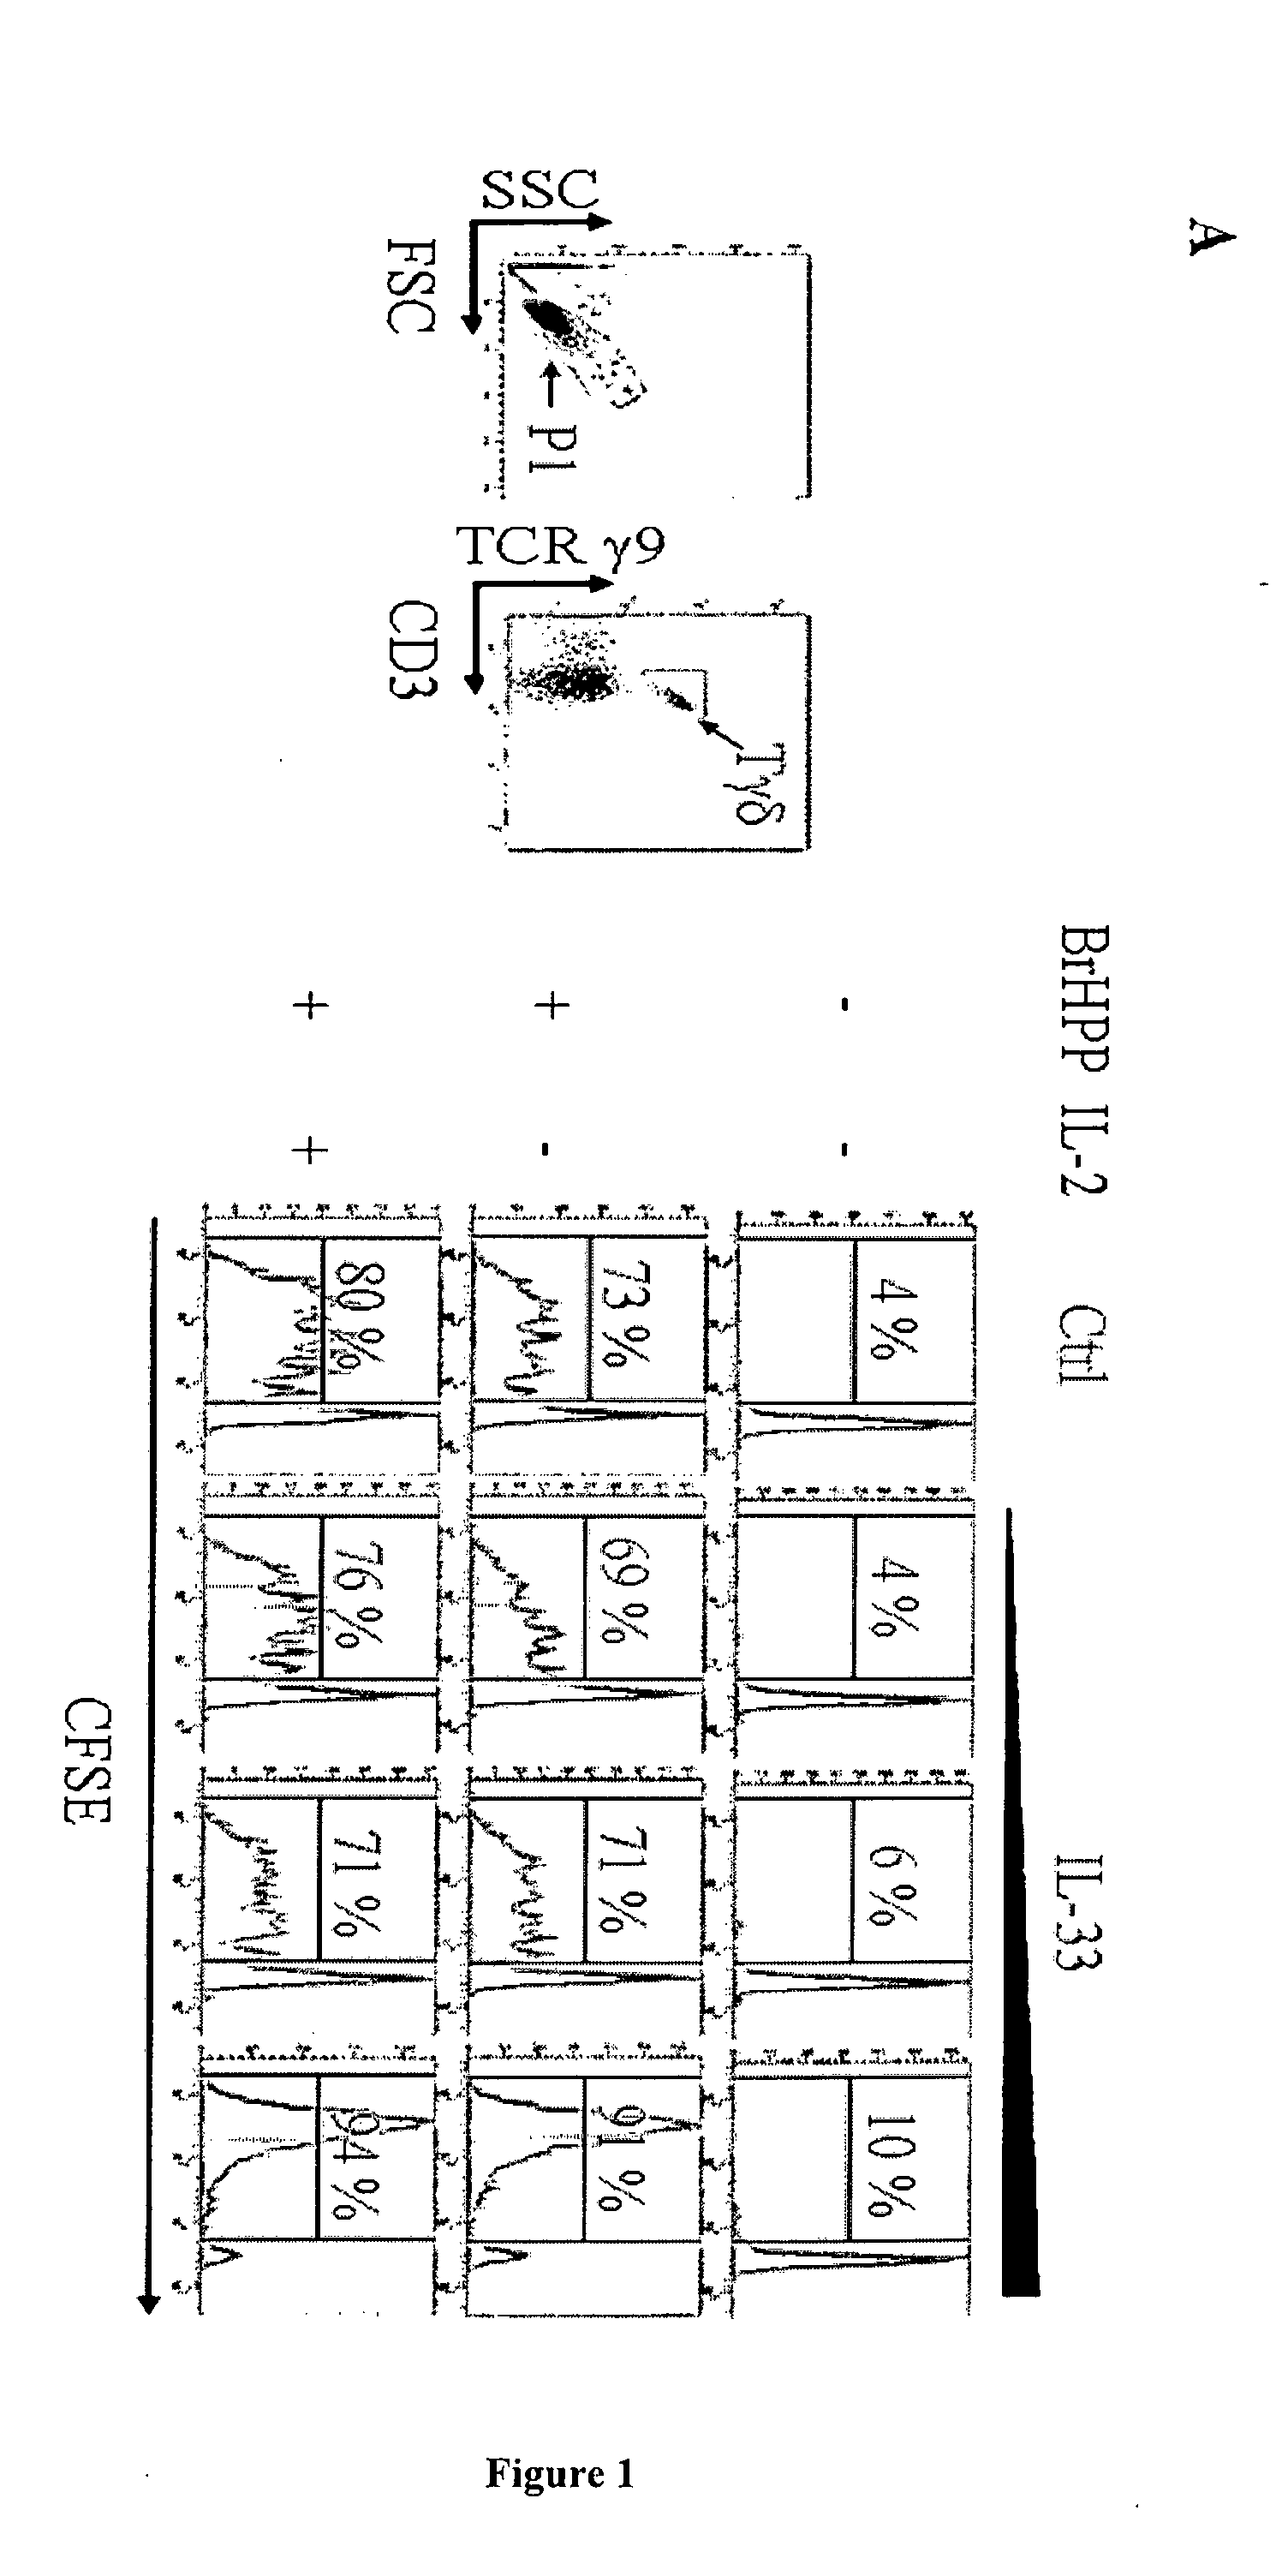 Method for inducing il-2-free proliferation of gamma delta t cells